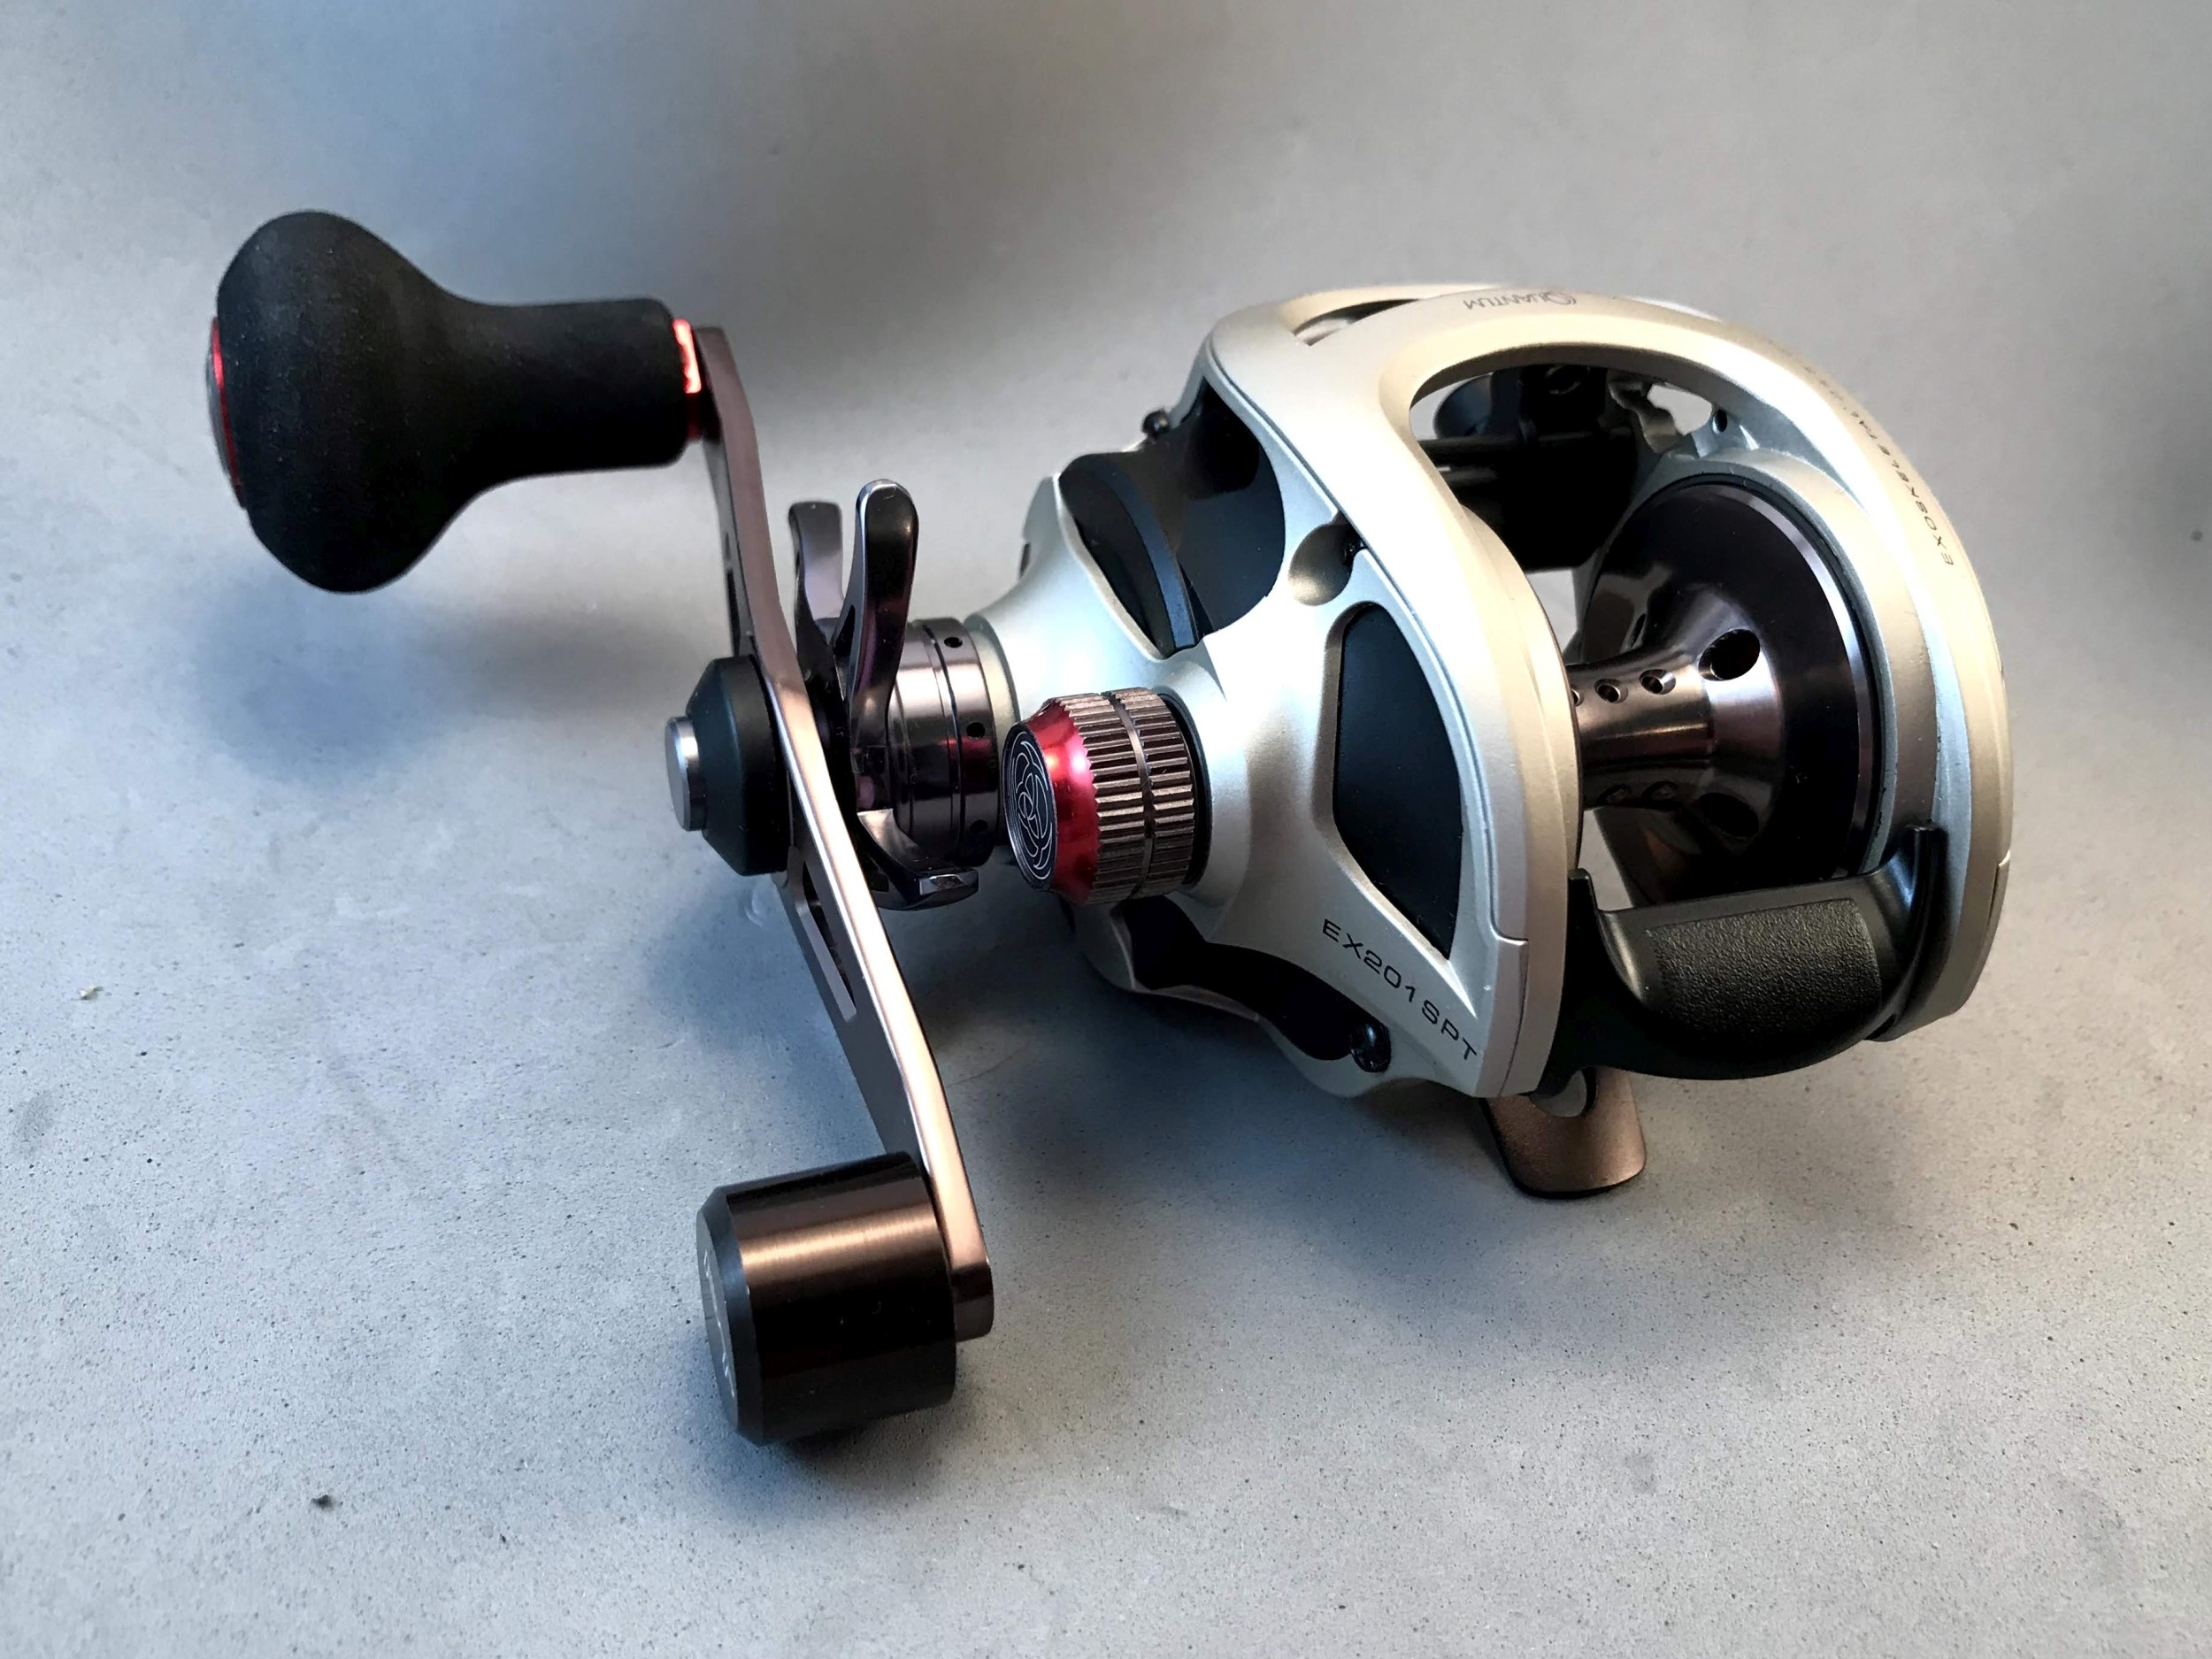 REVIEW: Quantum EXO Baitcast reels reviewed by FishingGearTester